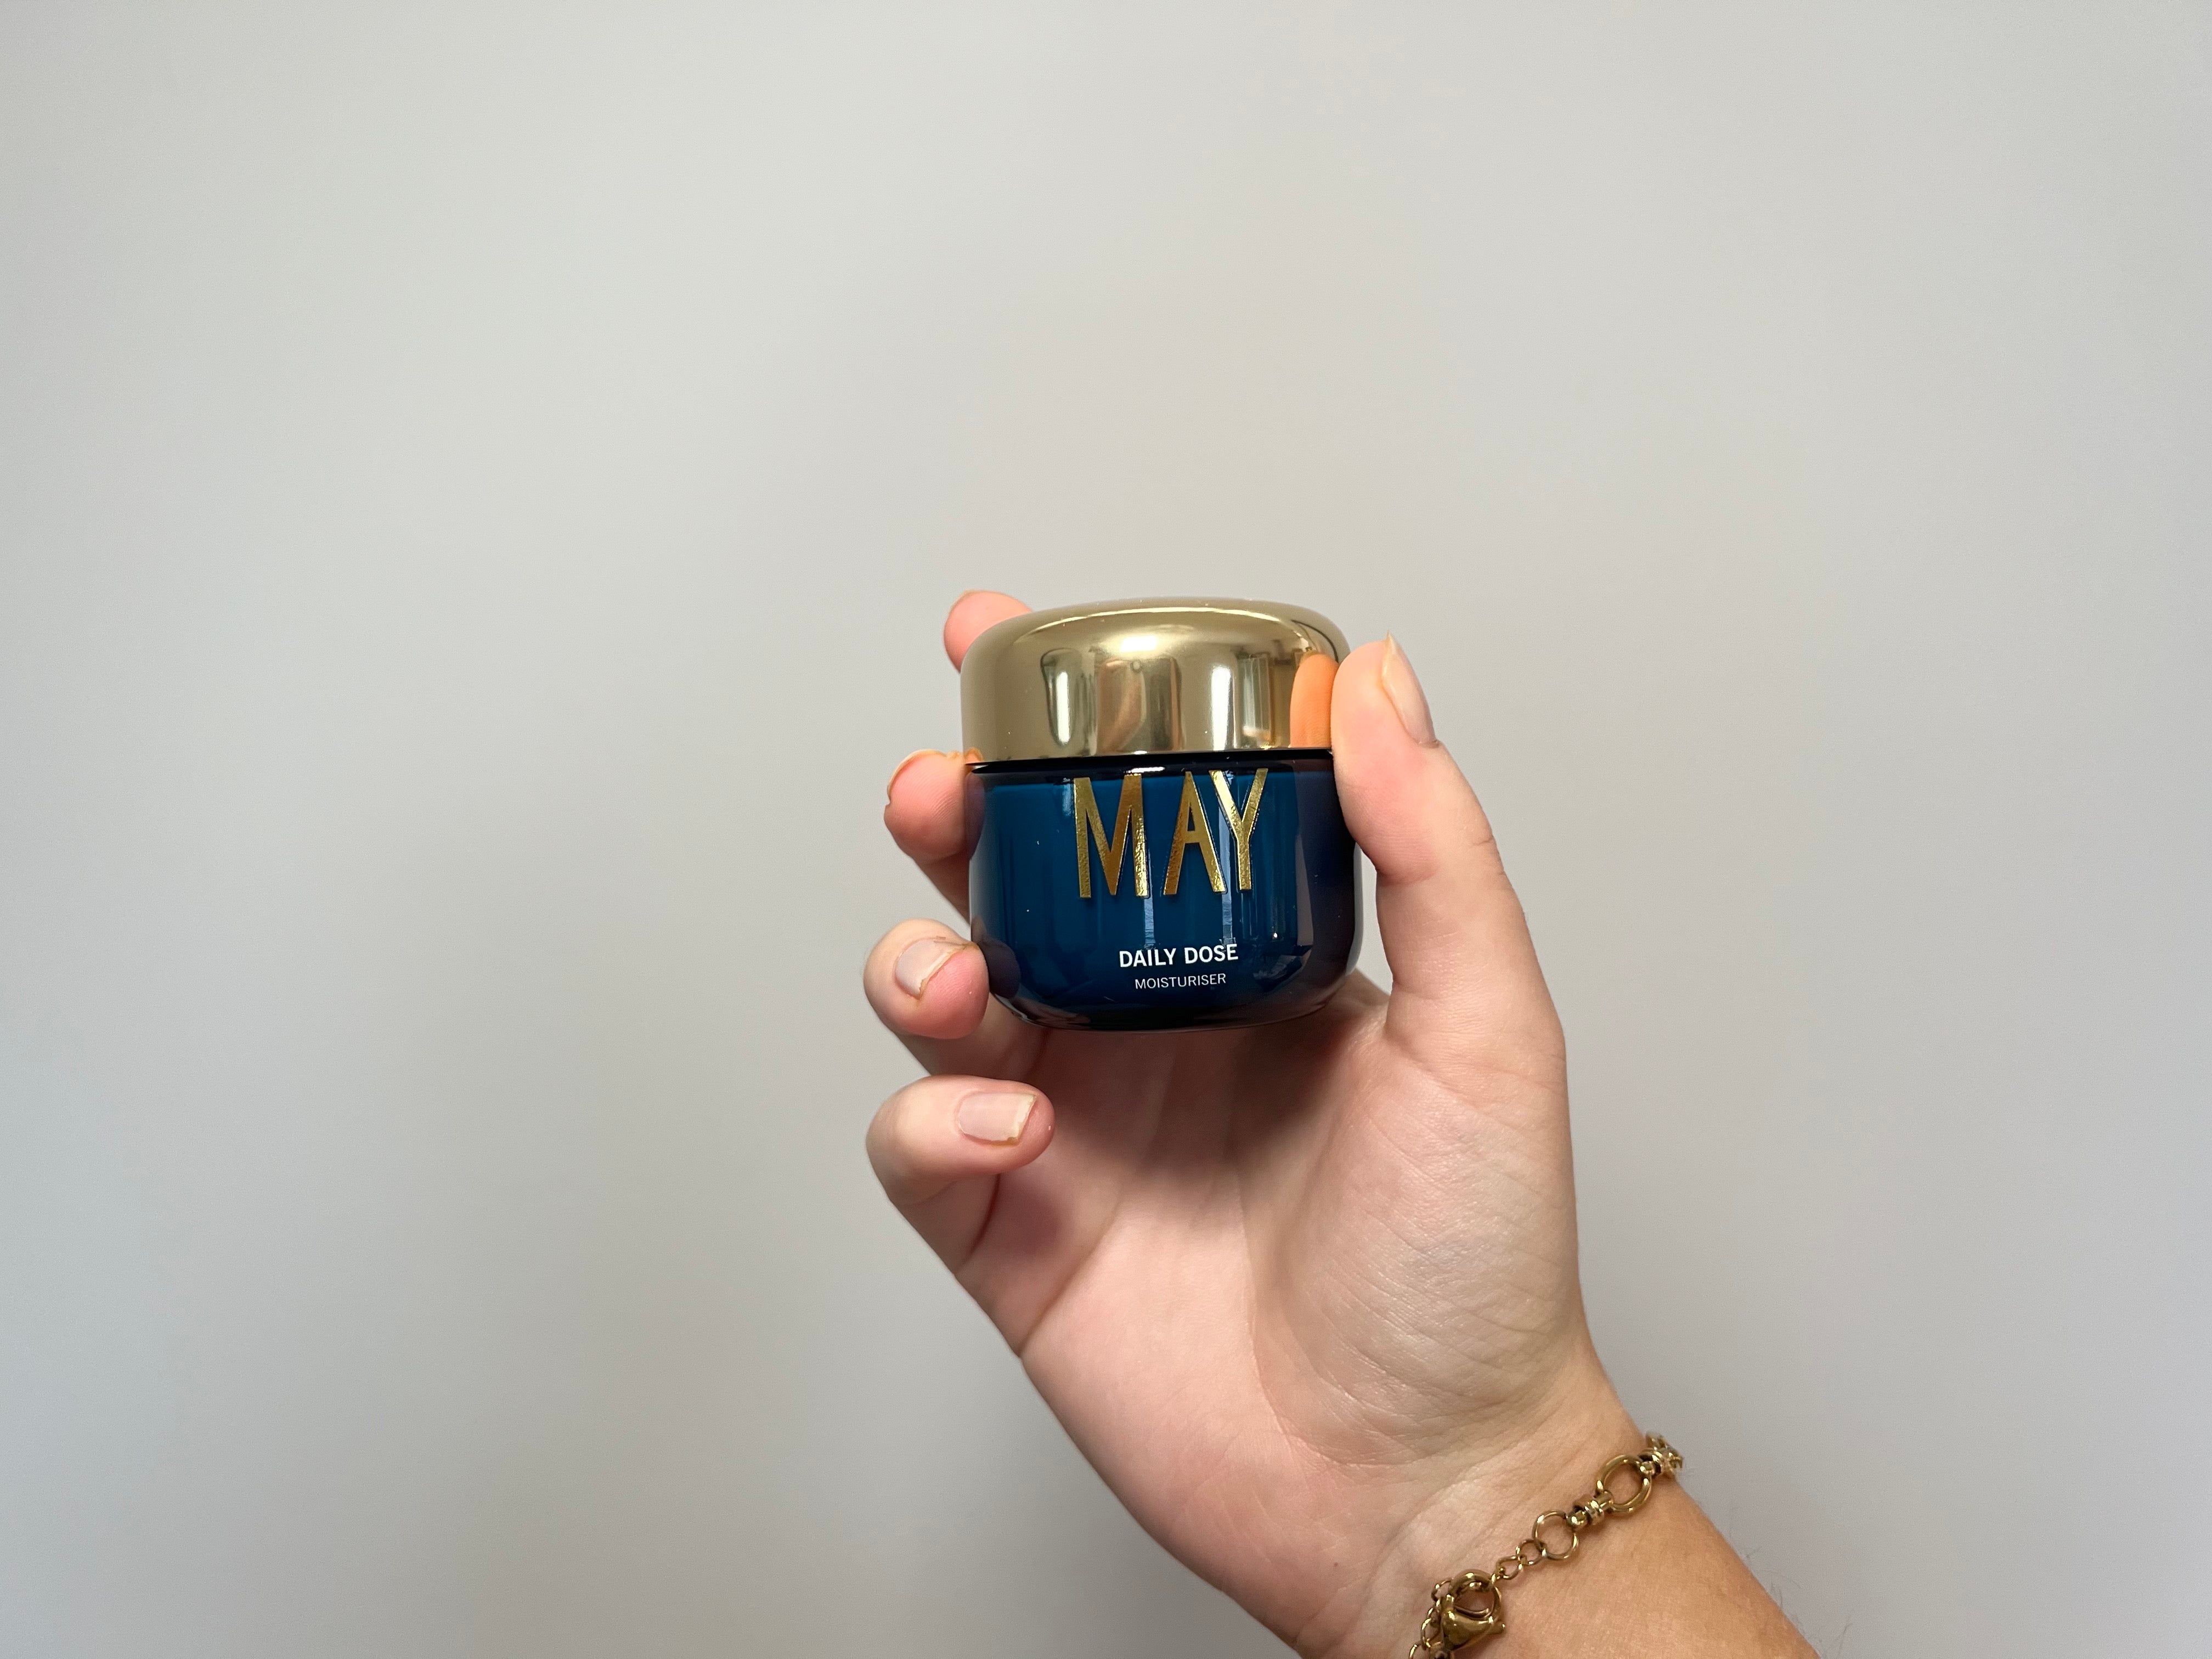 May Botanicals daily dose moisturiser review